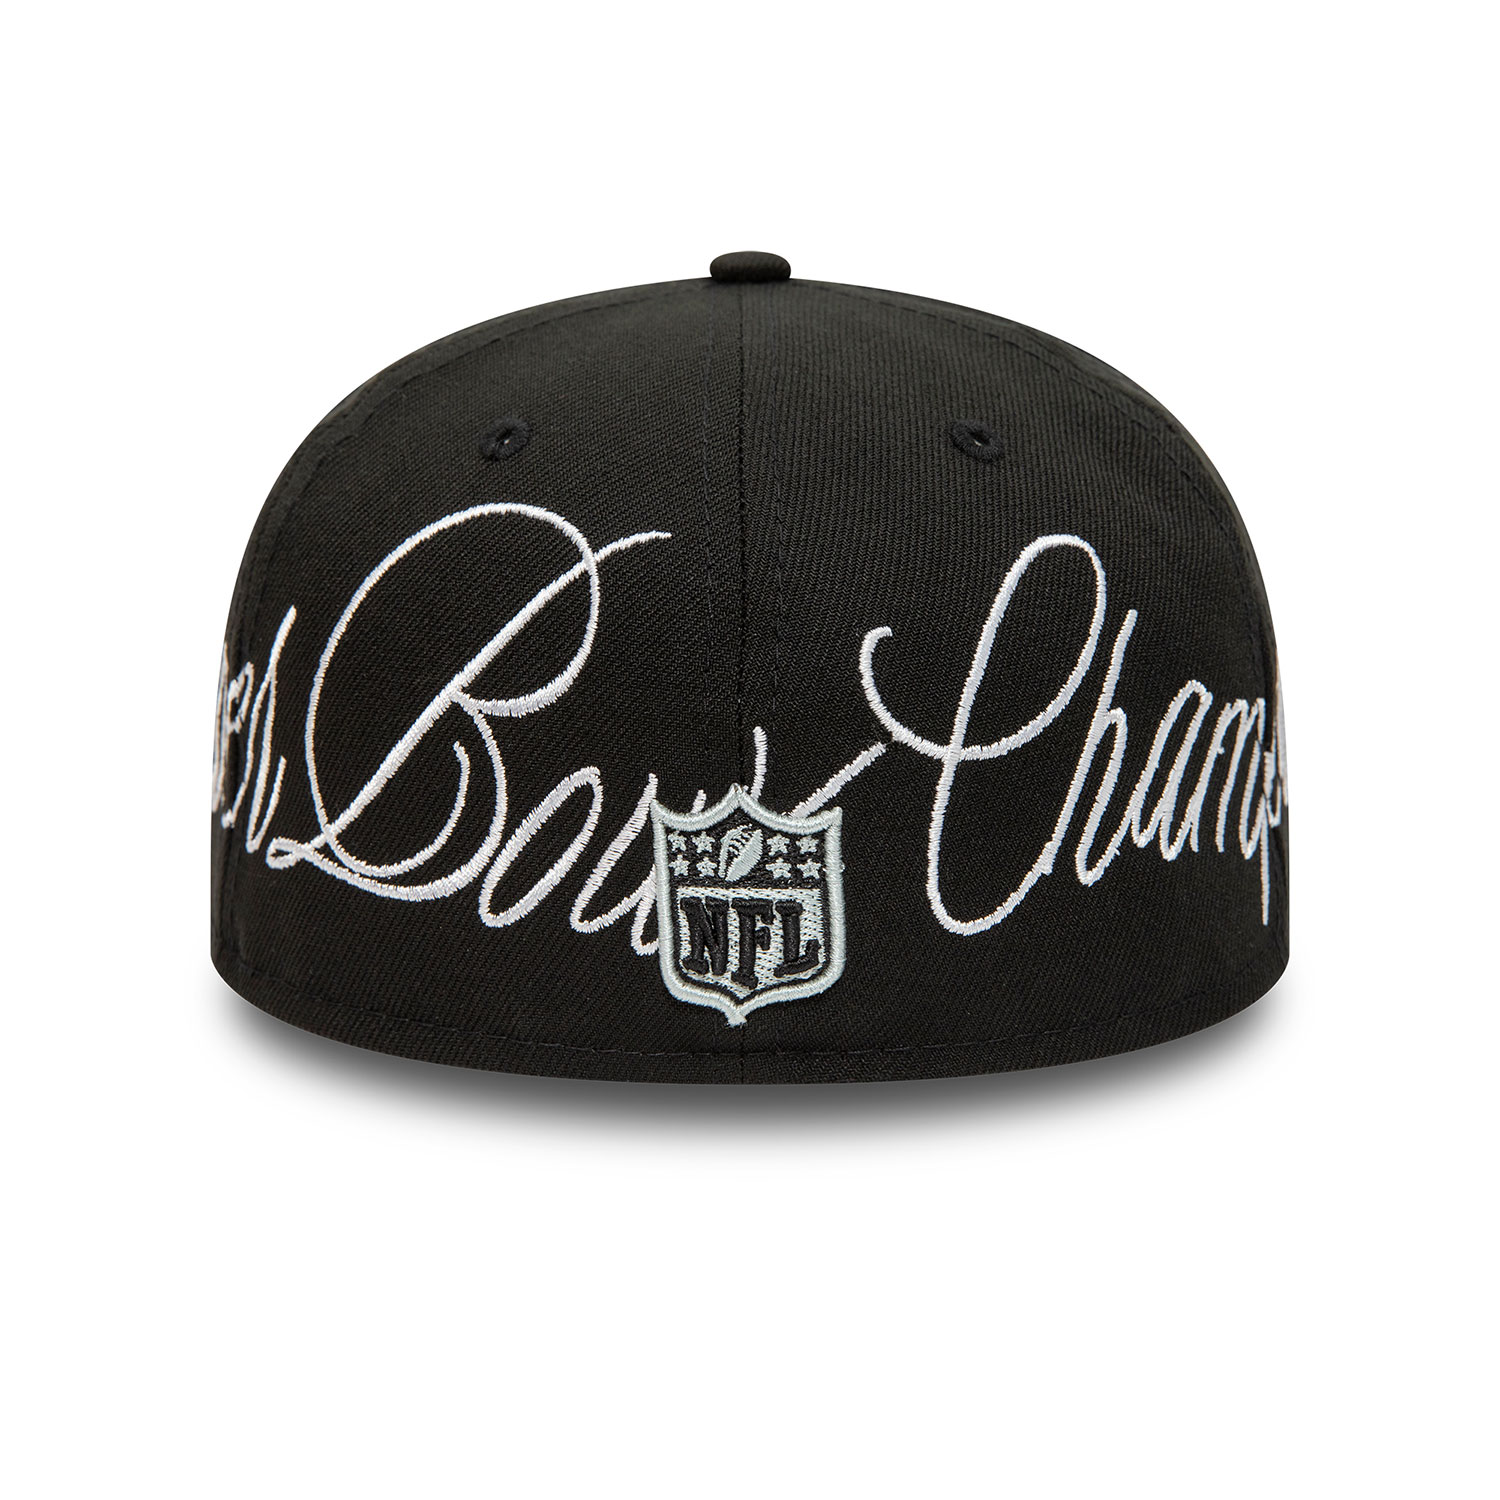 Las Vegas Raiders Historic Champs Black 59FIFTY Fitted Cap